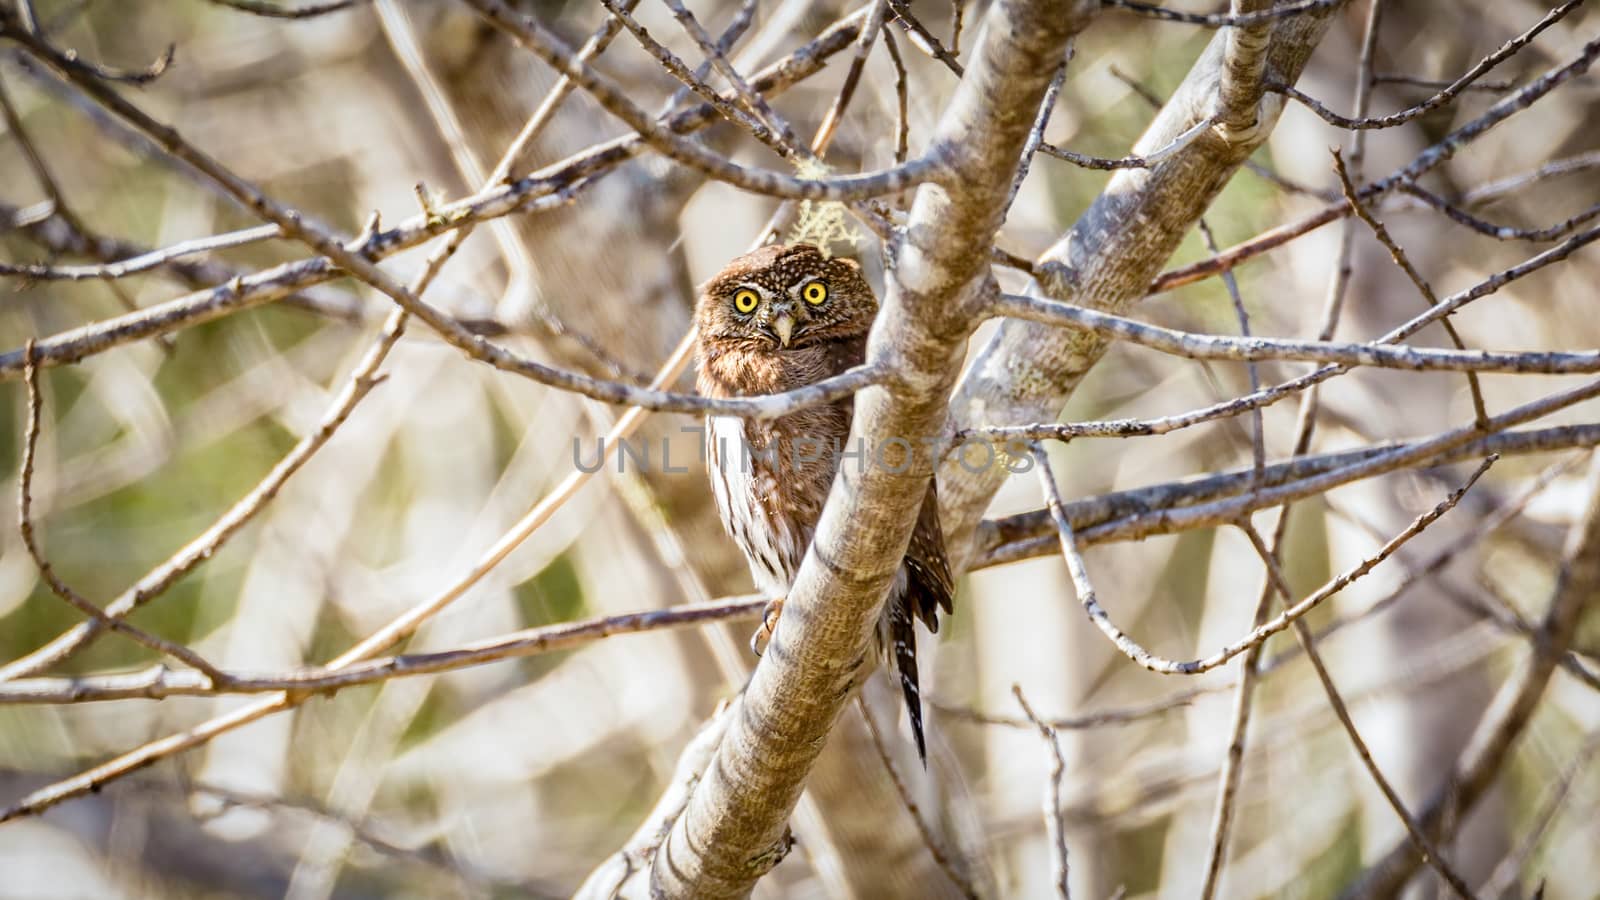 Wild Owl in Nature, Color Image, Northern California, USA